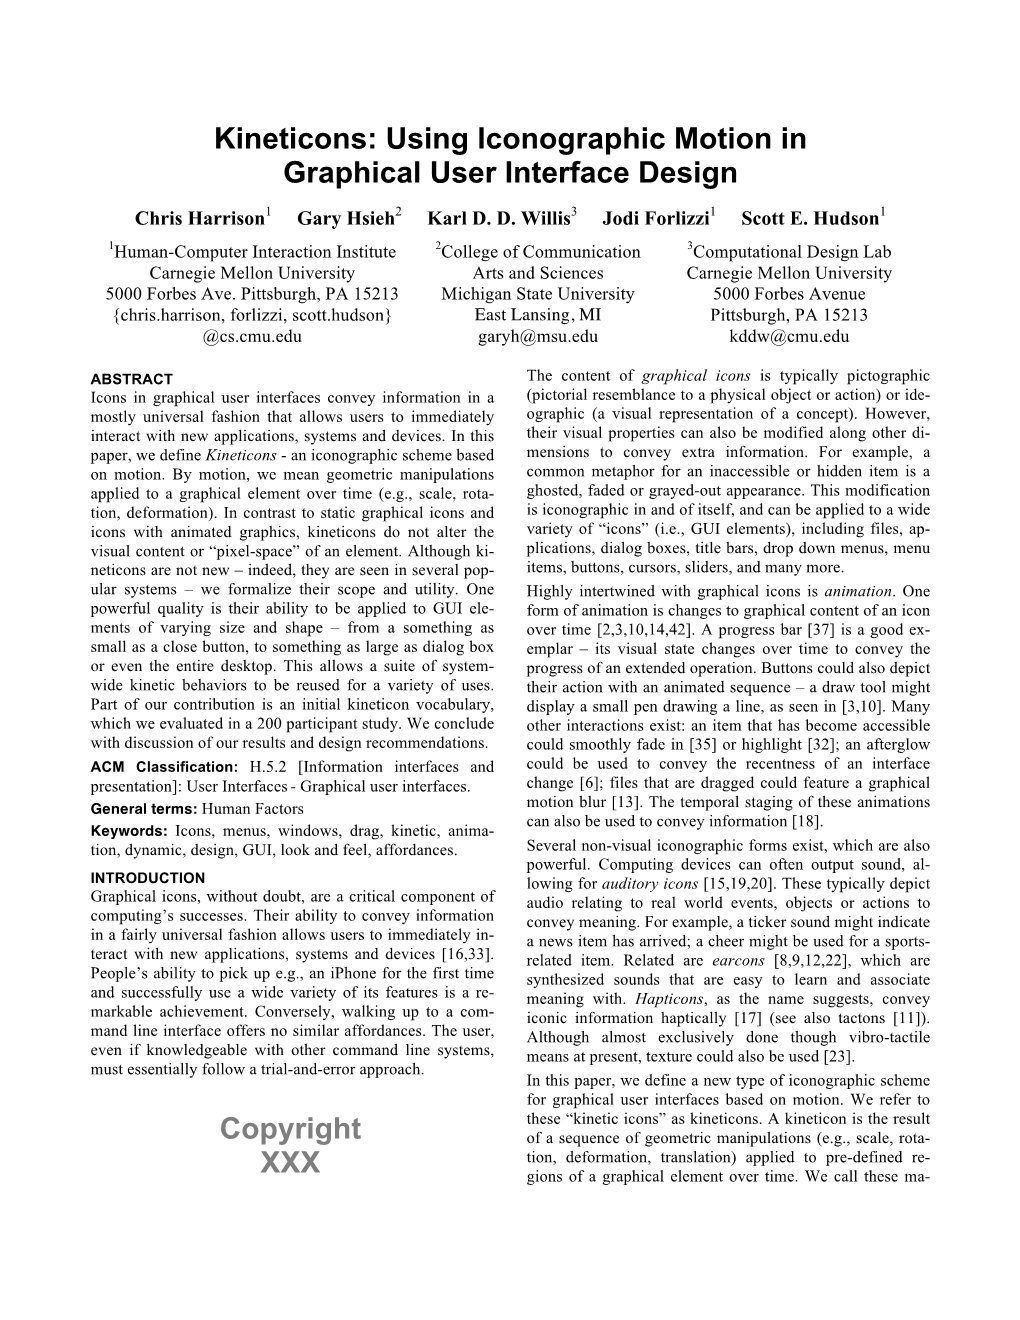 Kineticons: Using Iconographic Motion in Graphical User Interface Design